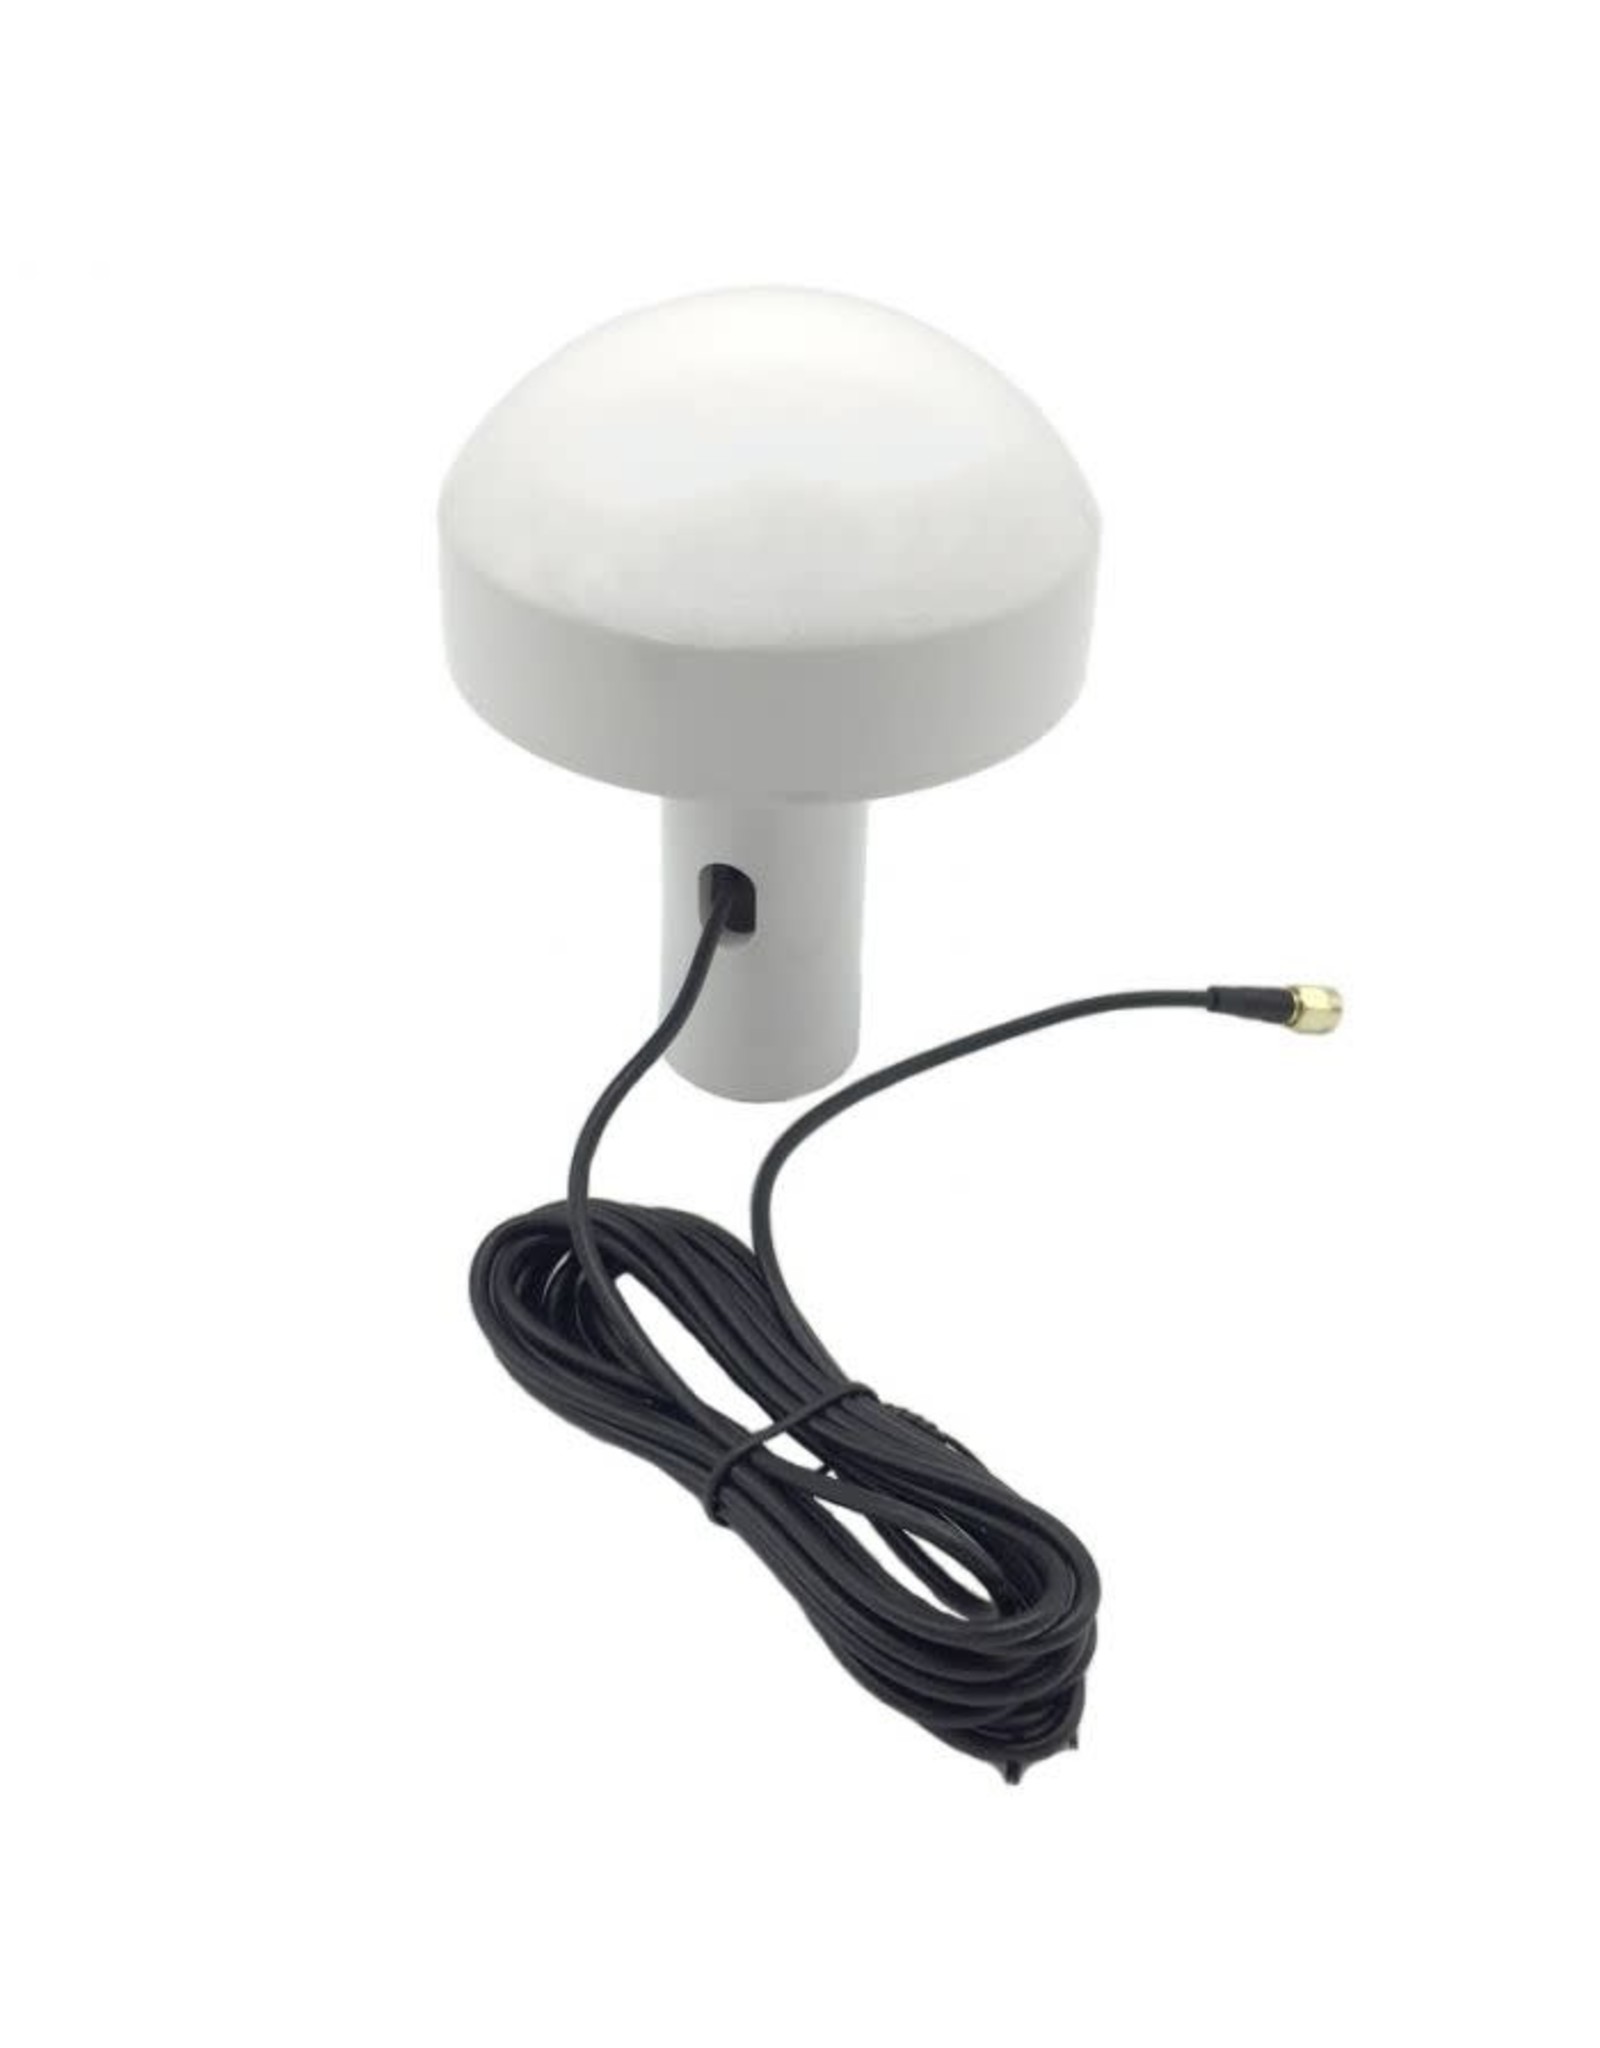 QHYCCD QHY 174M-GPS Monochrome Cooled CMOS Time Domain Imager & GPS Receiver - QHY174M-GPS